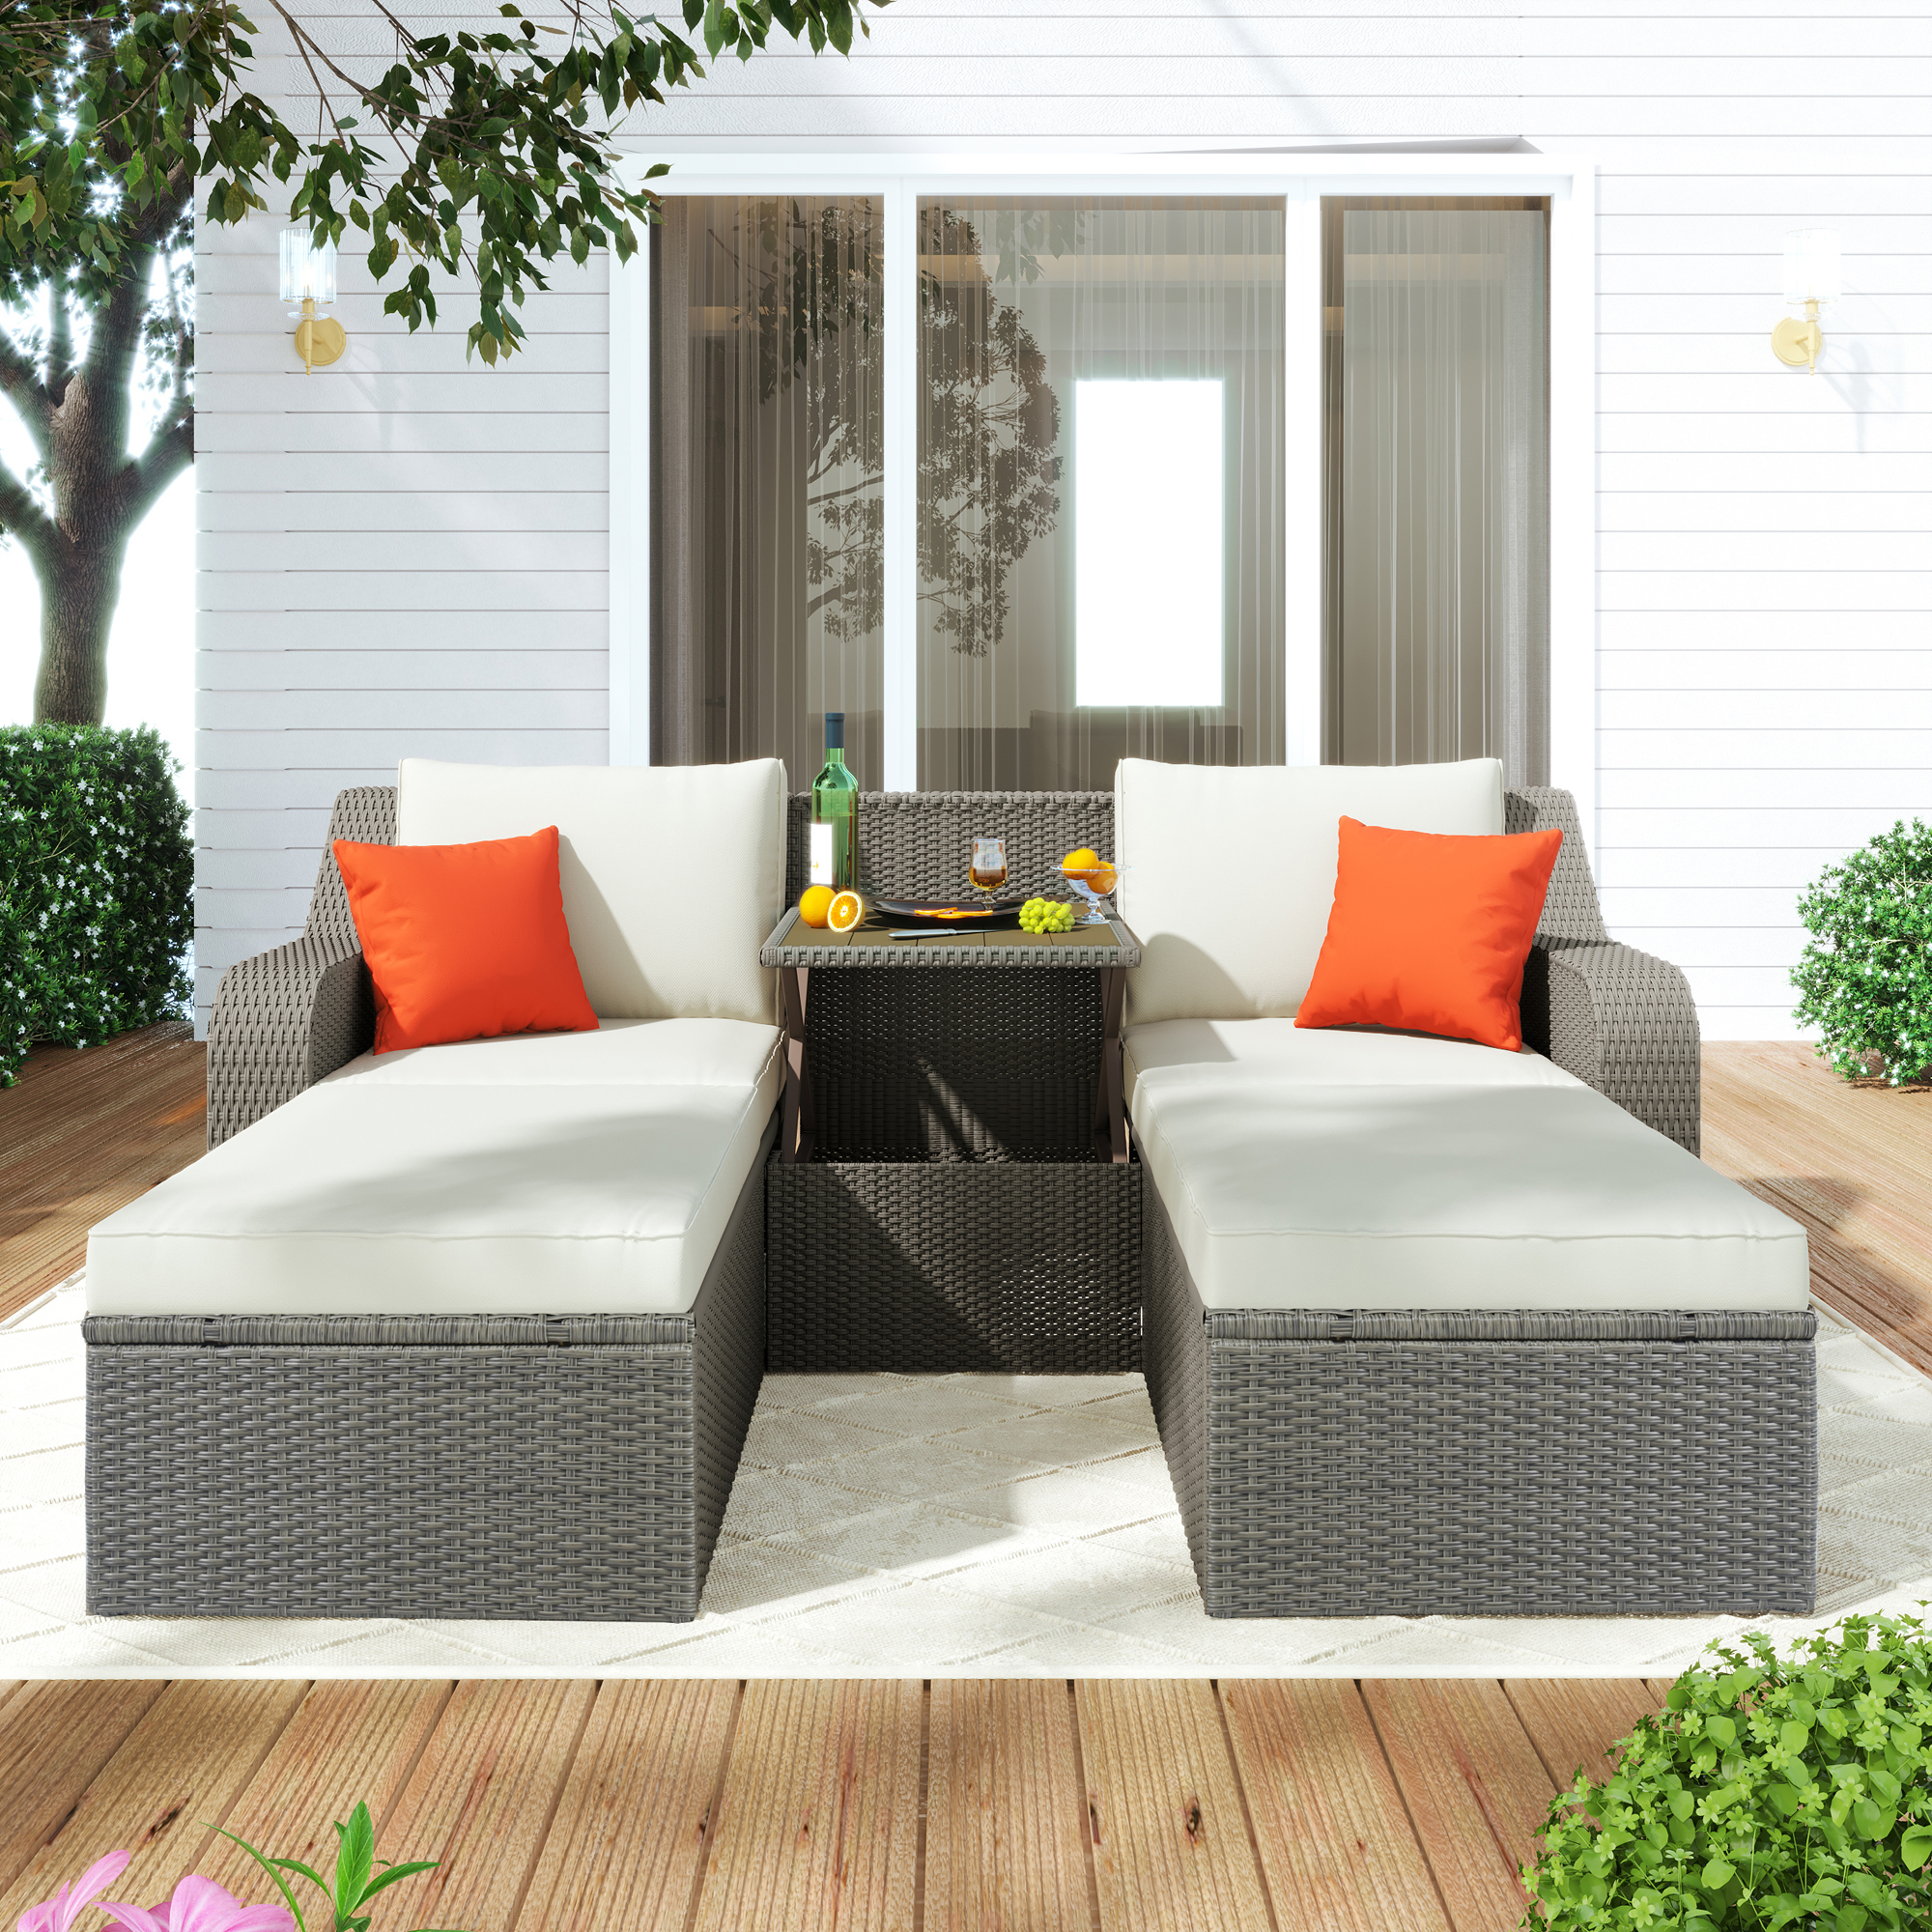 Gray Wicker Patio Seating Sets, SESSLIFE 3-Piece Outdoor Sectional Sofa Set with Loveseat and Soft Cushions, All-Weather Outdoor Table and Chairs Set - image 2 of 9